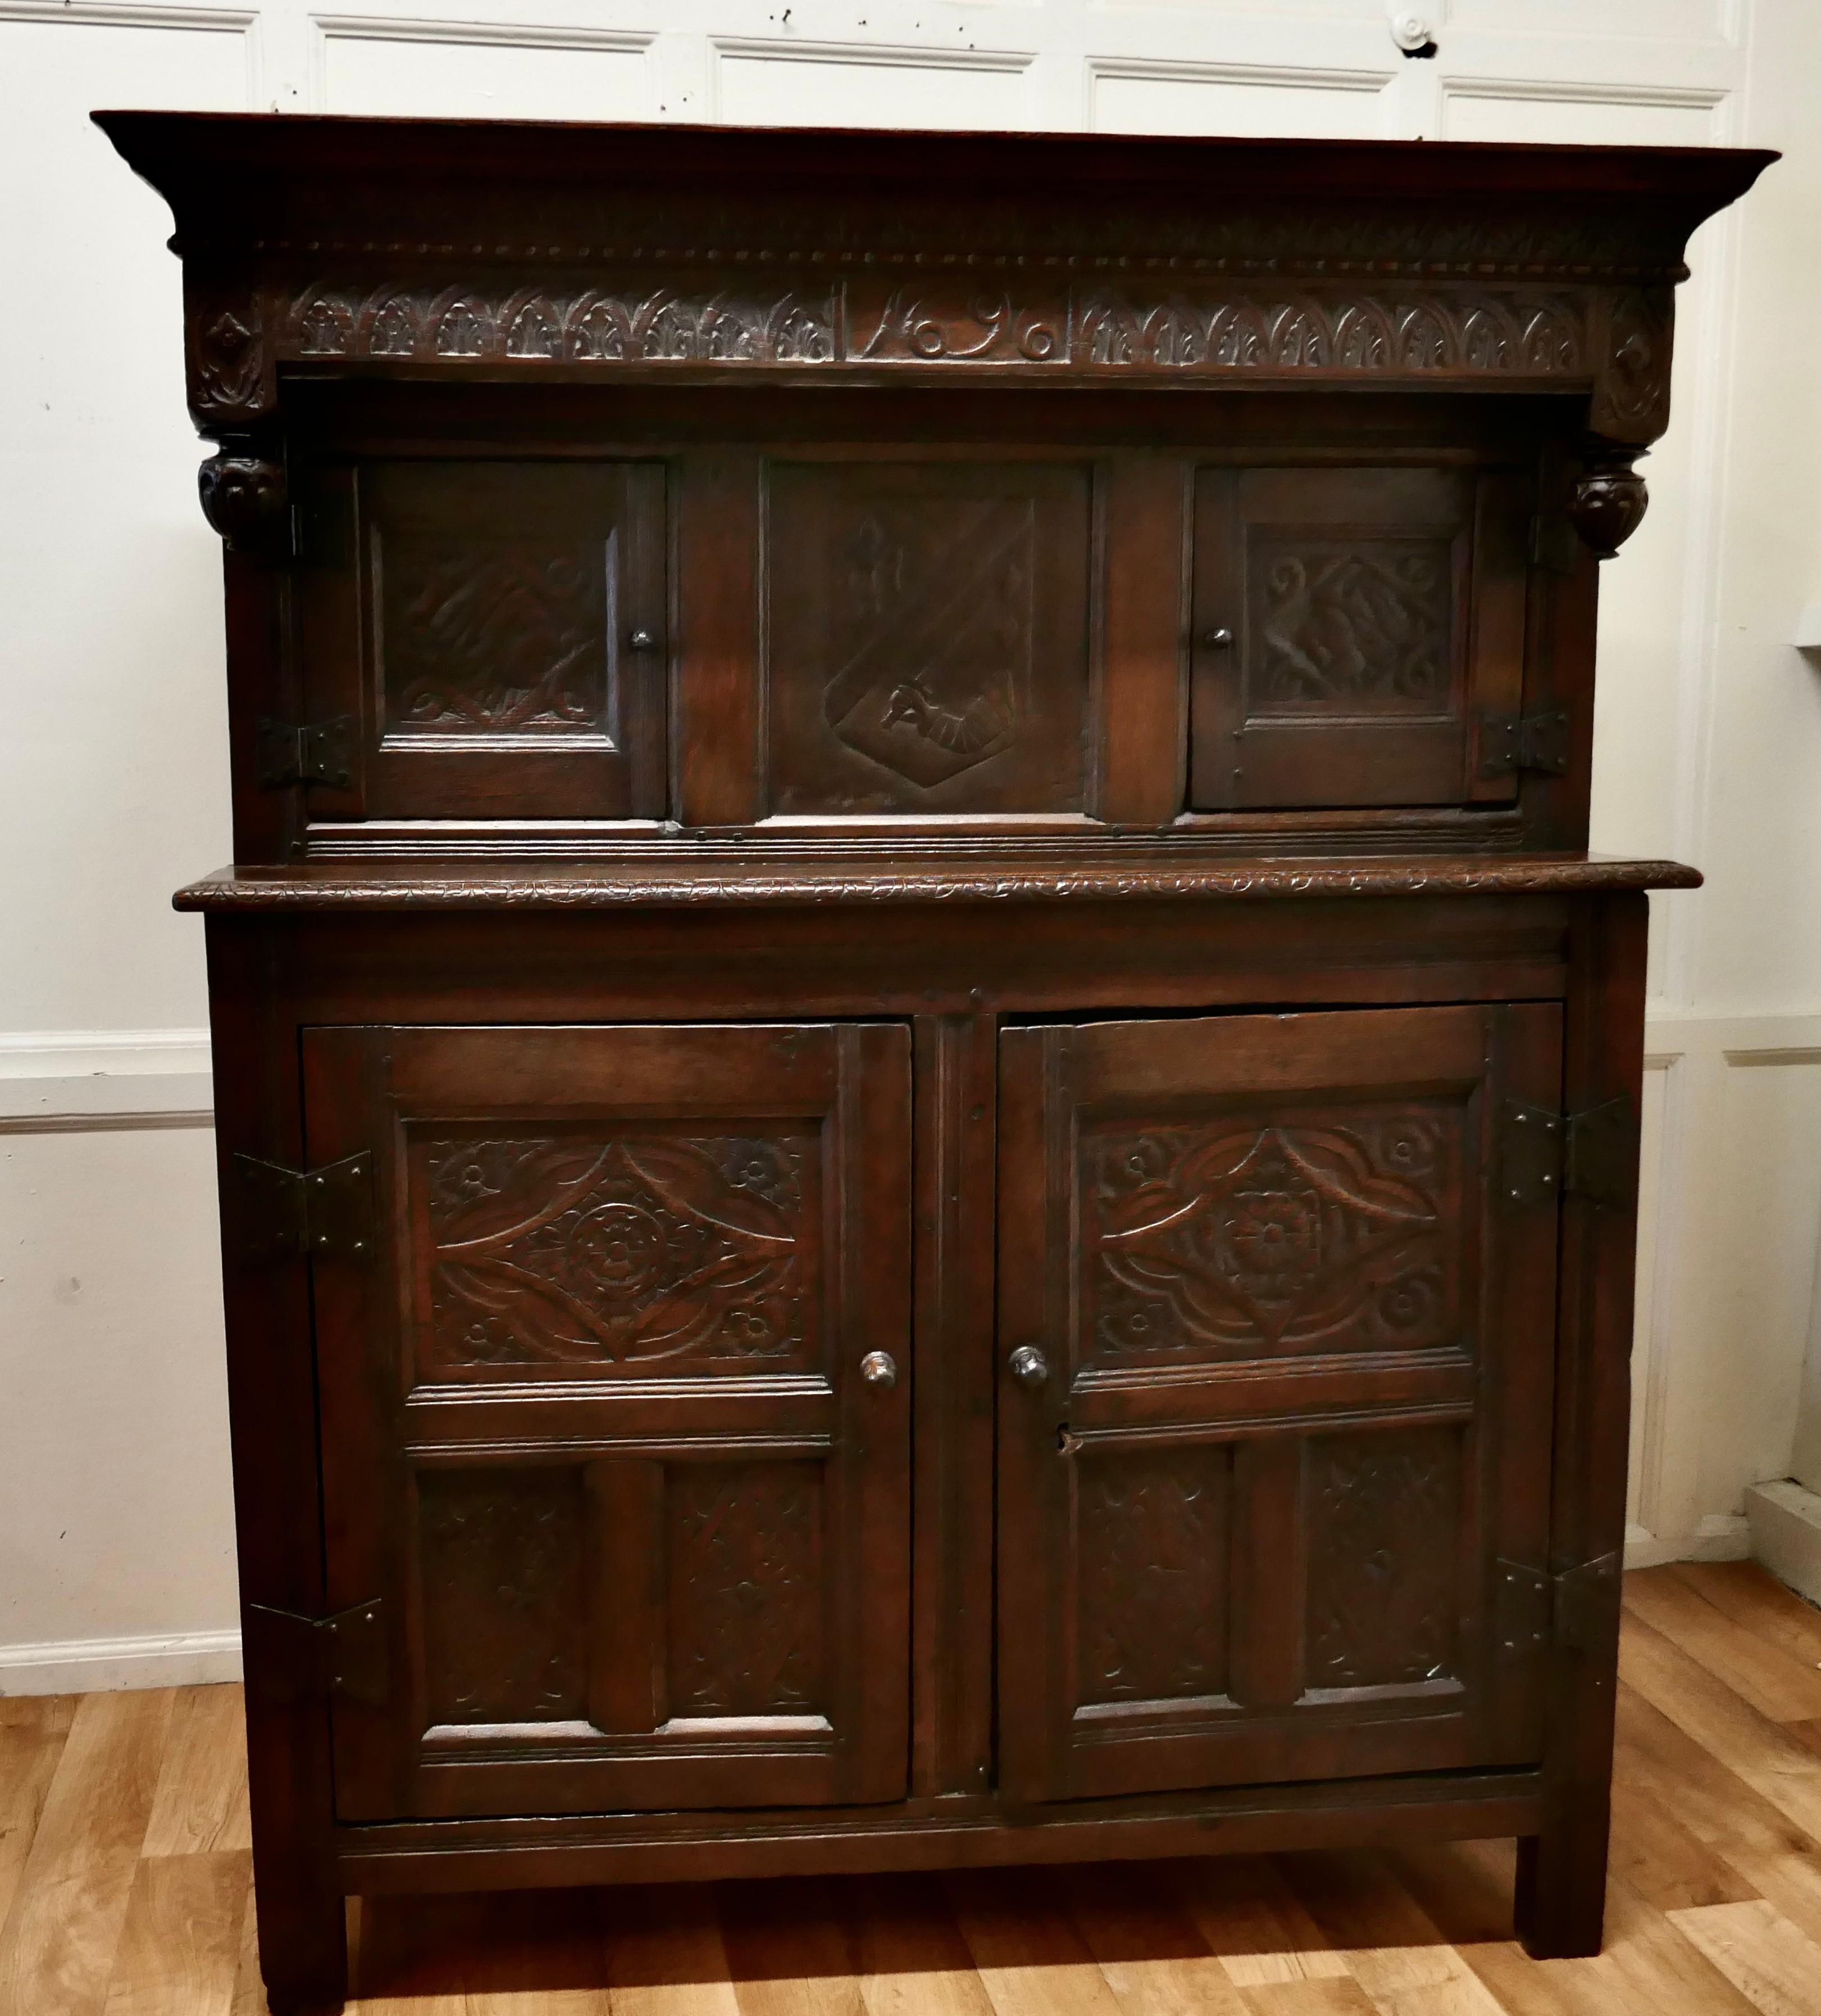 1696 French Carved Oak Court Cupboard, Cottage size Livery Cupboard 

This is a very attractive piece of carved oak furniture, the top section has the date 1696 carved into the centre of the cornice, this section has a long cupboard enclosed by 2